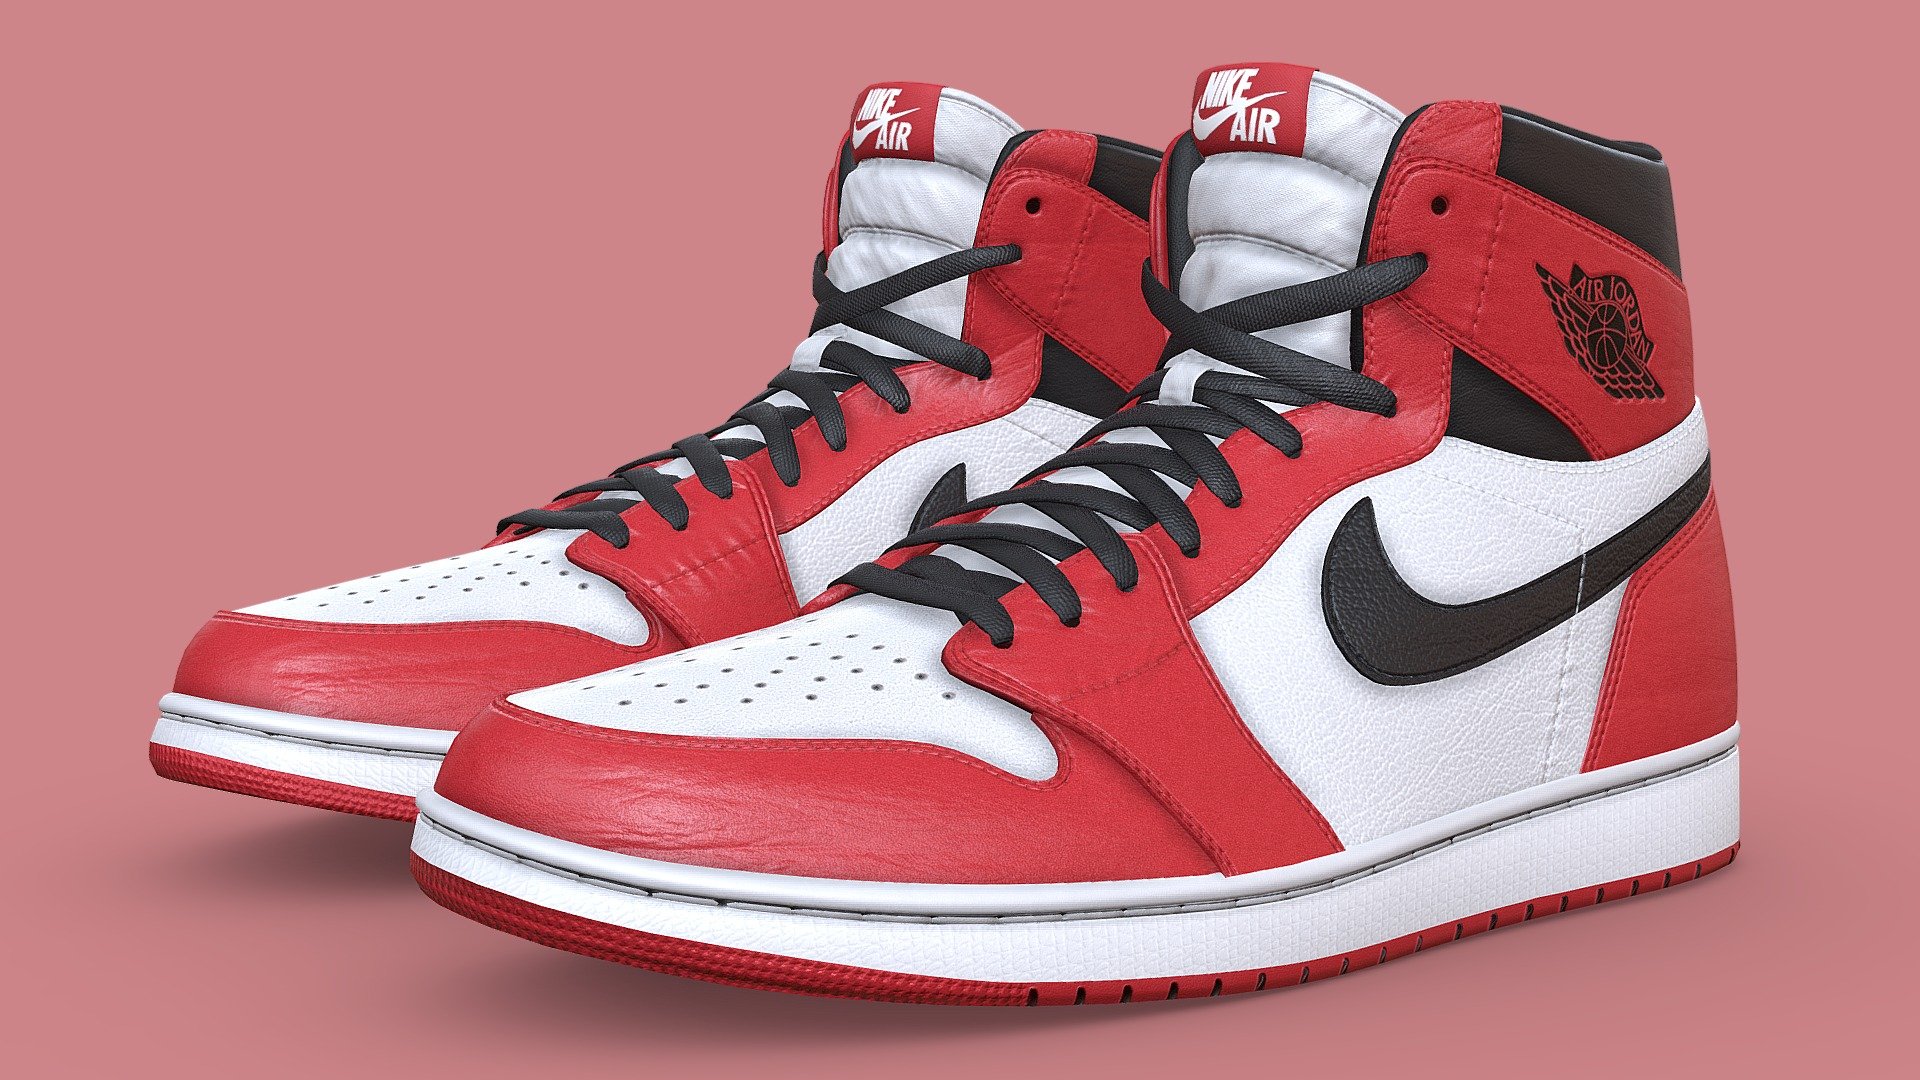 Game Ready, optimized version of my Jordan 1 shoe

This Low Poly version is included in the full version available here:
https://sketchfab.com/3d-models/jordan-1-retro-high-og-chicago-1857e55a24fb445d876c20a164a037ec

This version features an optimized mesh. High Poly detail on the sole has been replaced with a baked normal map and the rest of the model has been streamlined to reduce the polycount 3d model